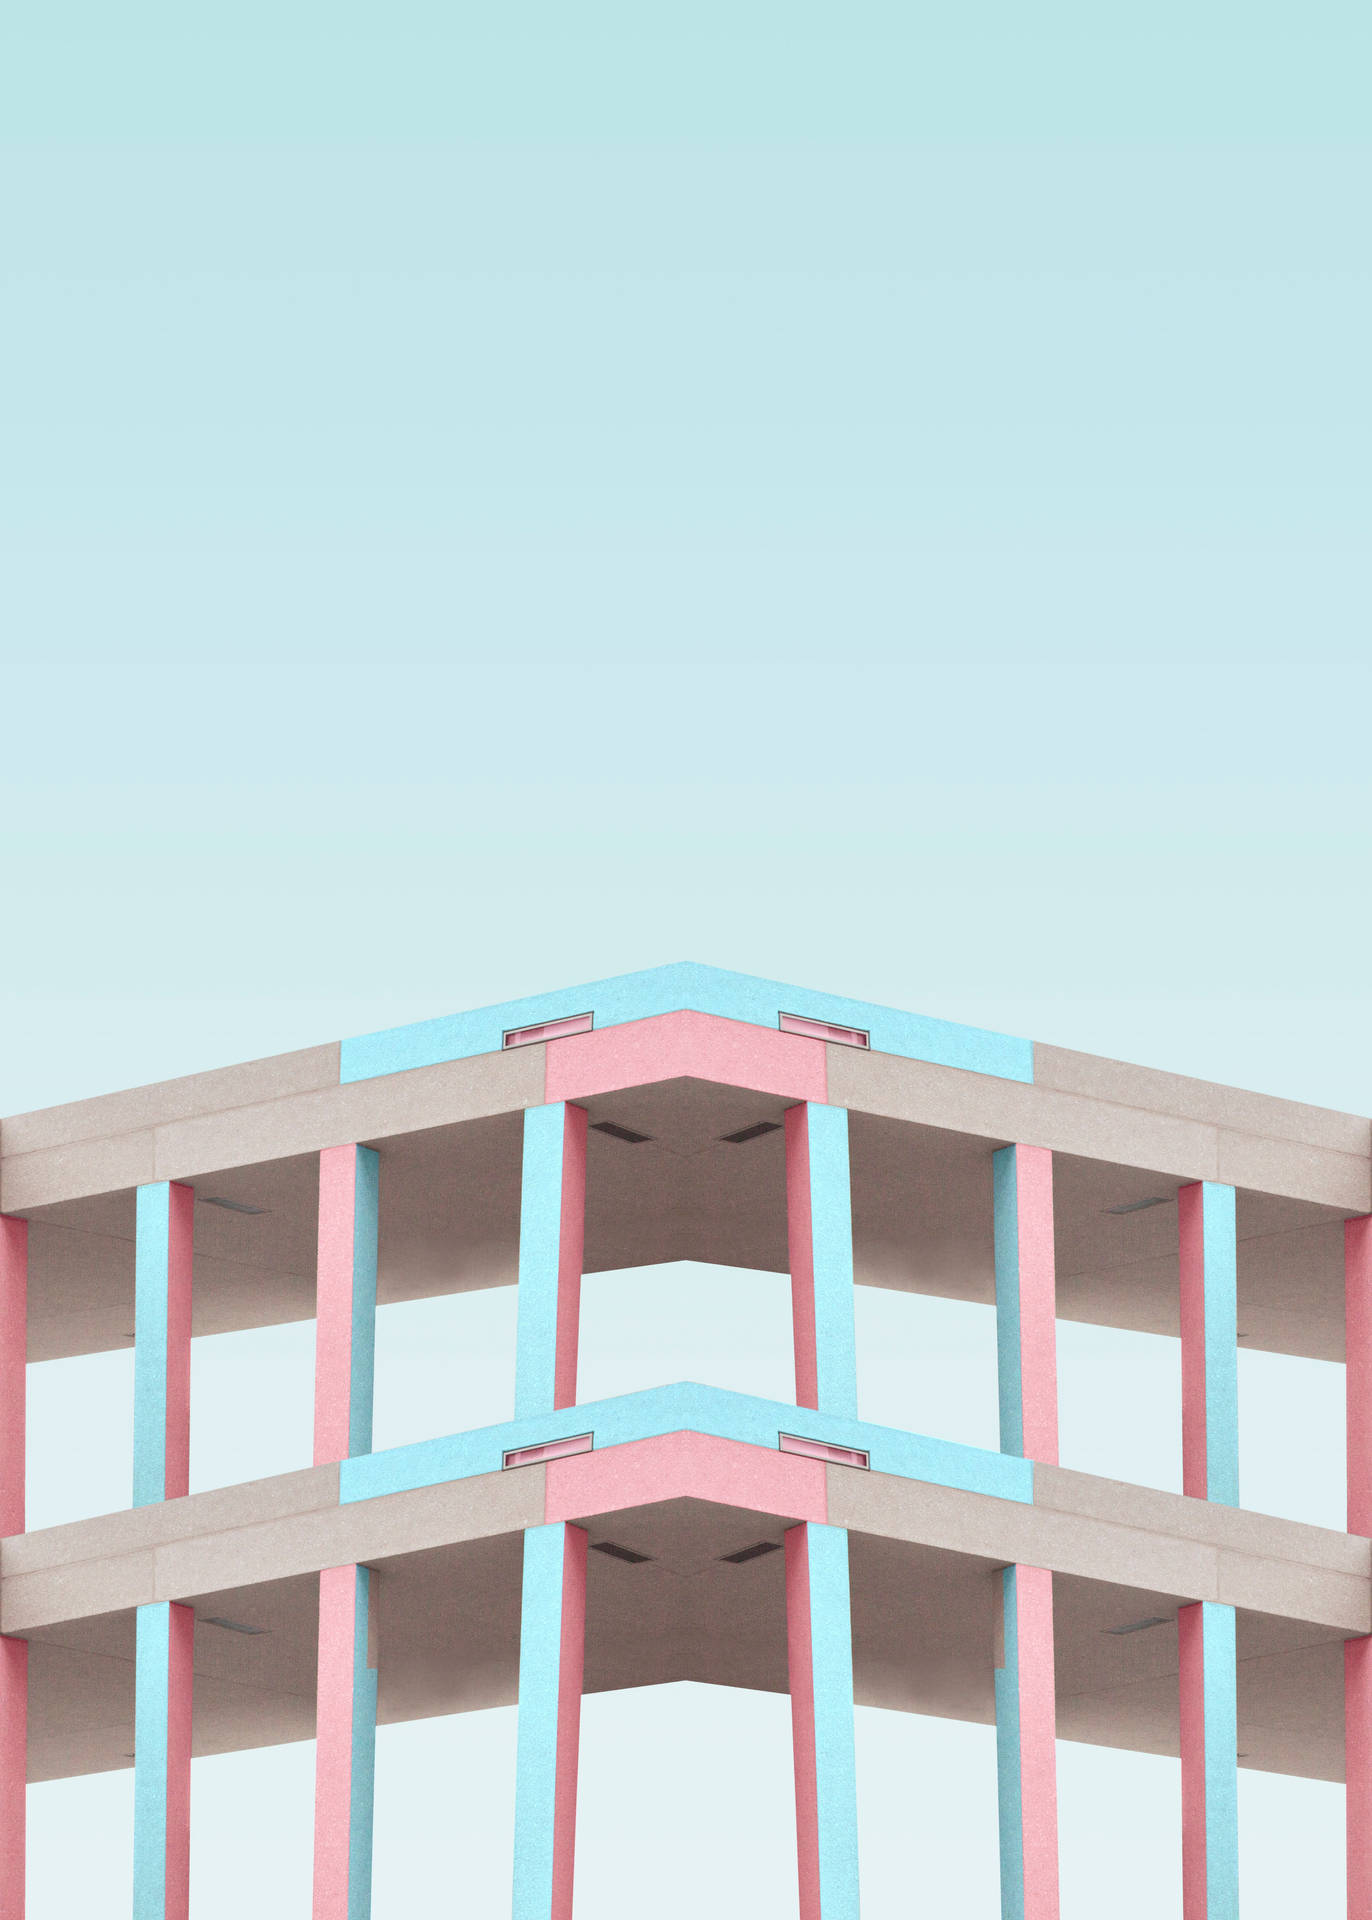 Minimal Blue And Pink Building Architecture